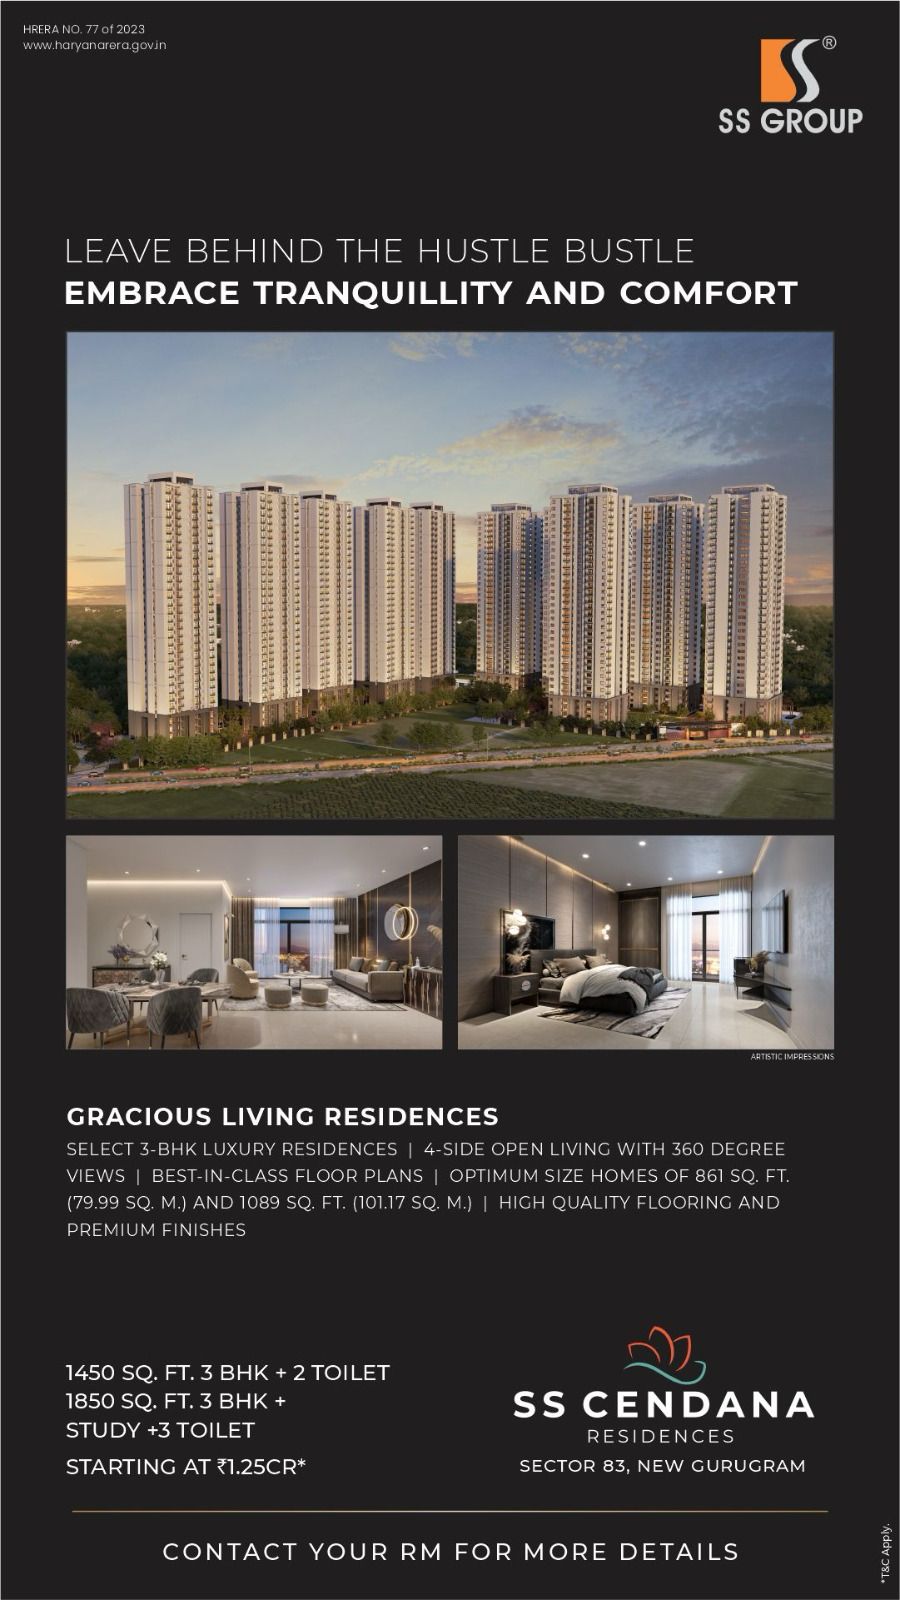 Leave behind the hustle bustle embrace tranquillity and comfort at SS Cendana Residence in Sector 83, Gurgaon